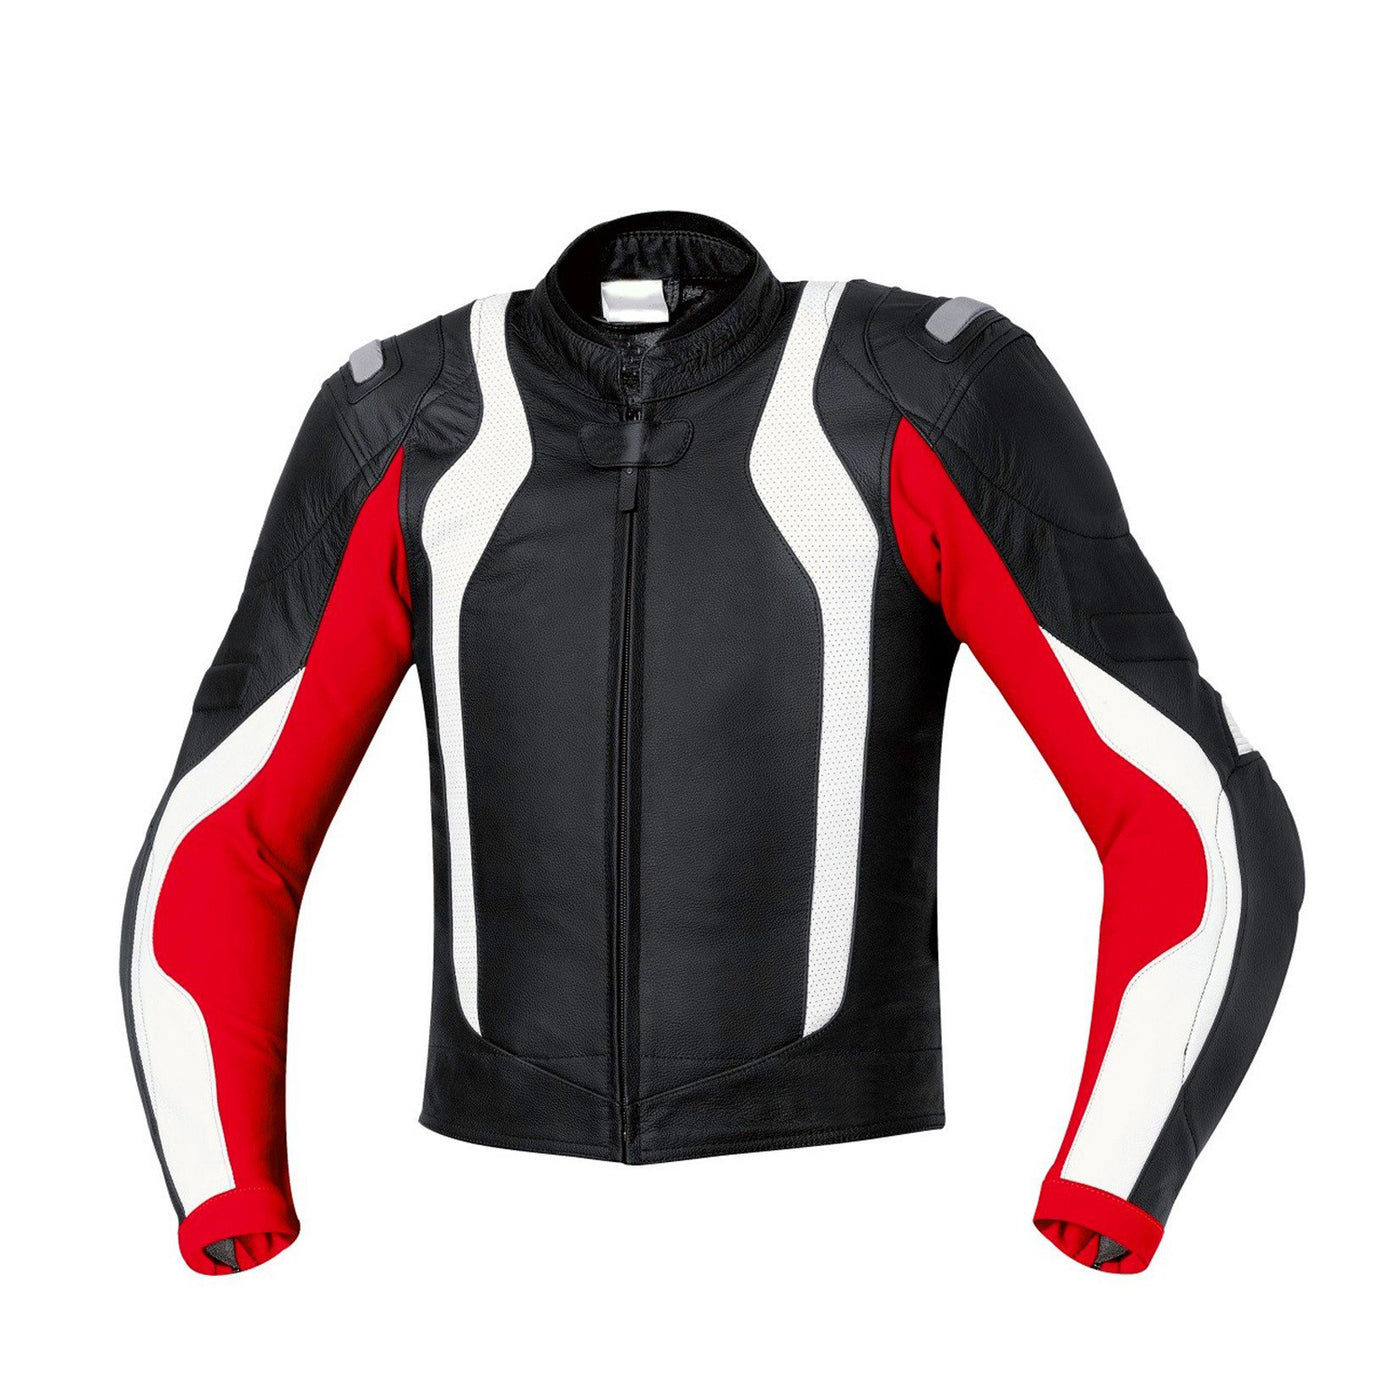 Motorcycle armor protection jacket in black, red, and white